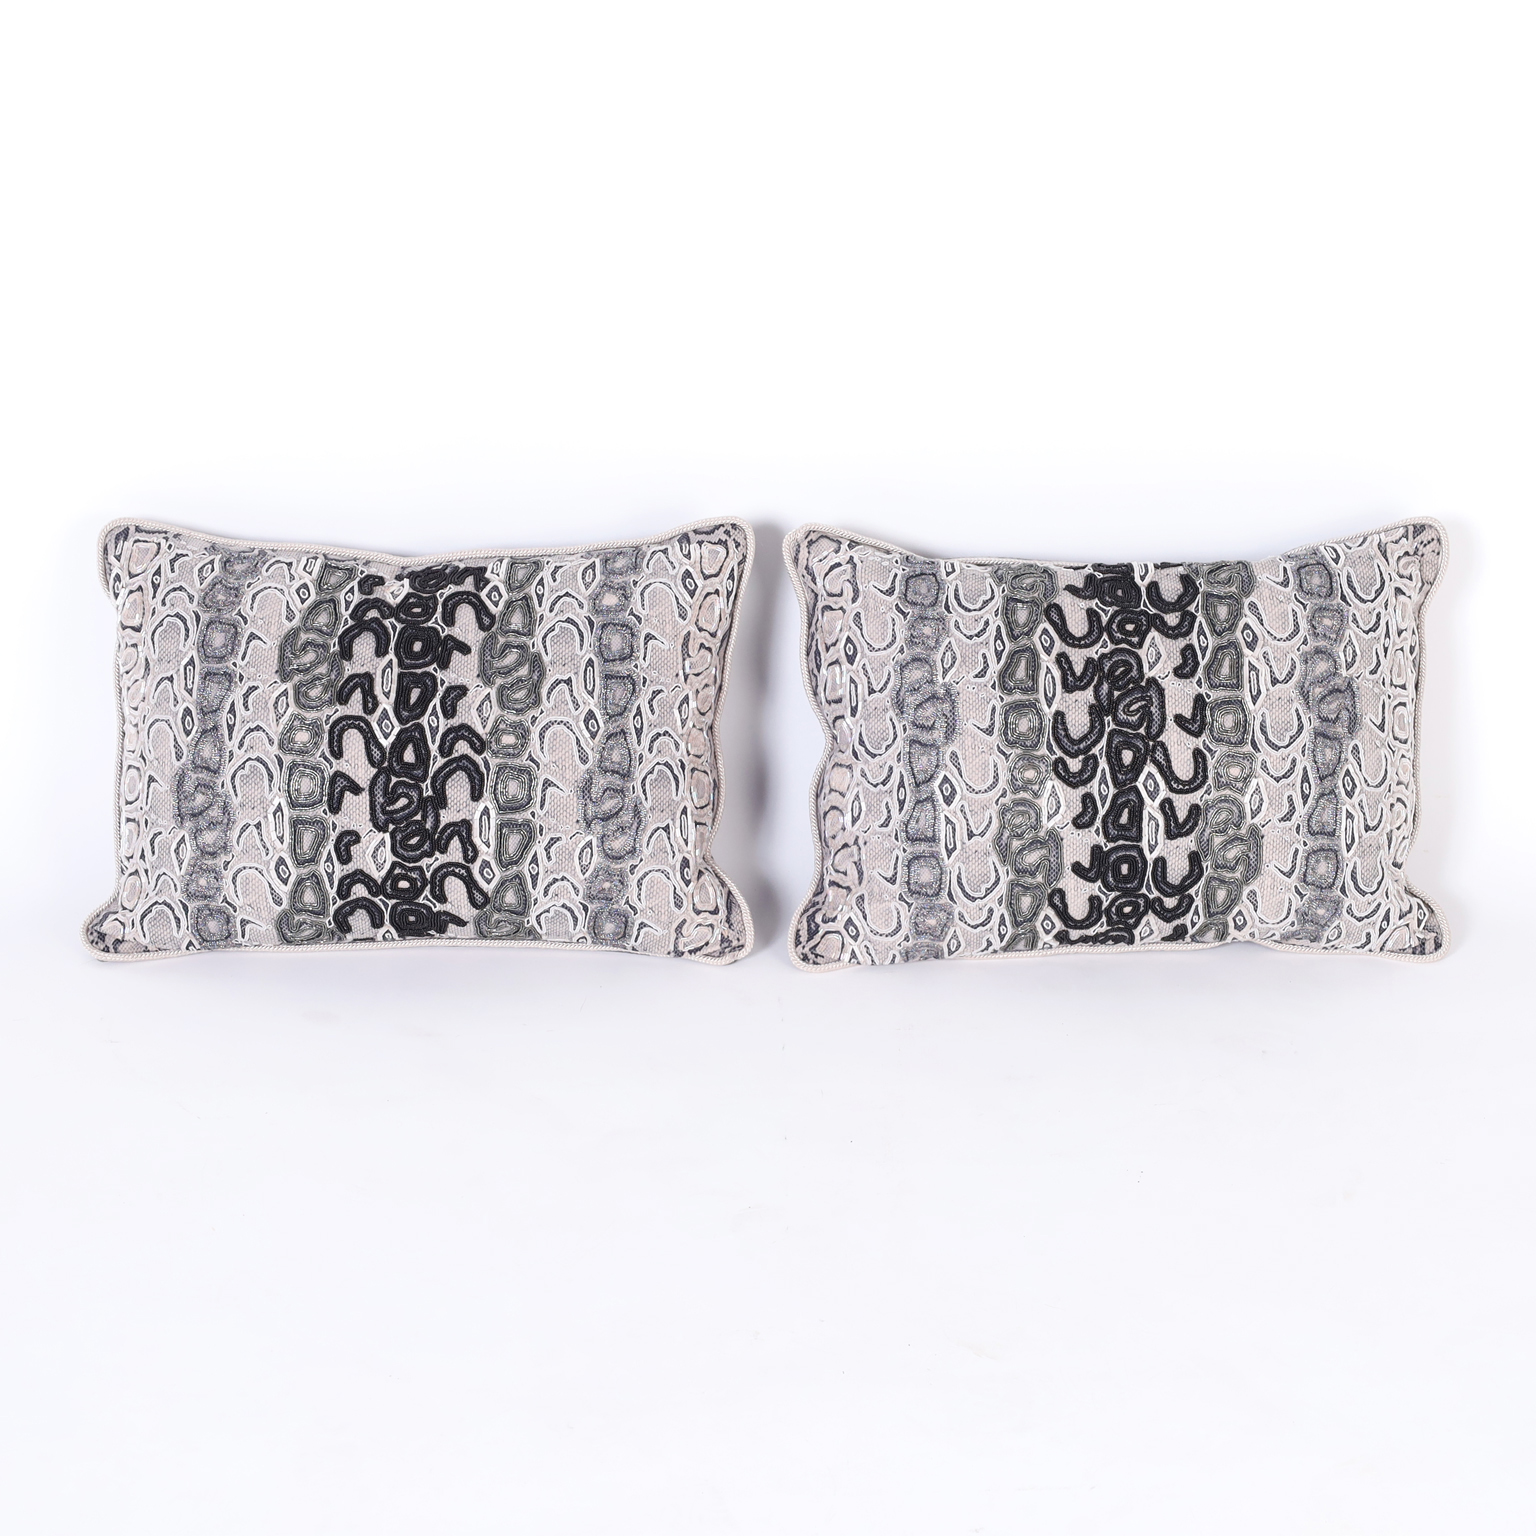 Two Glass Beaded Pillows by Elizabeth Phillips, Priced Individually